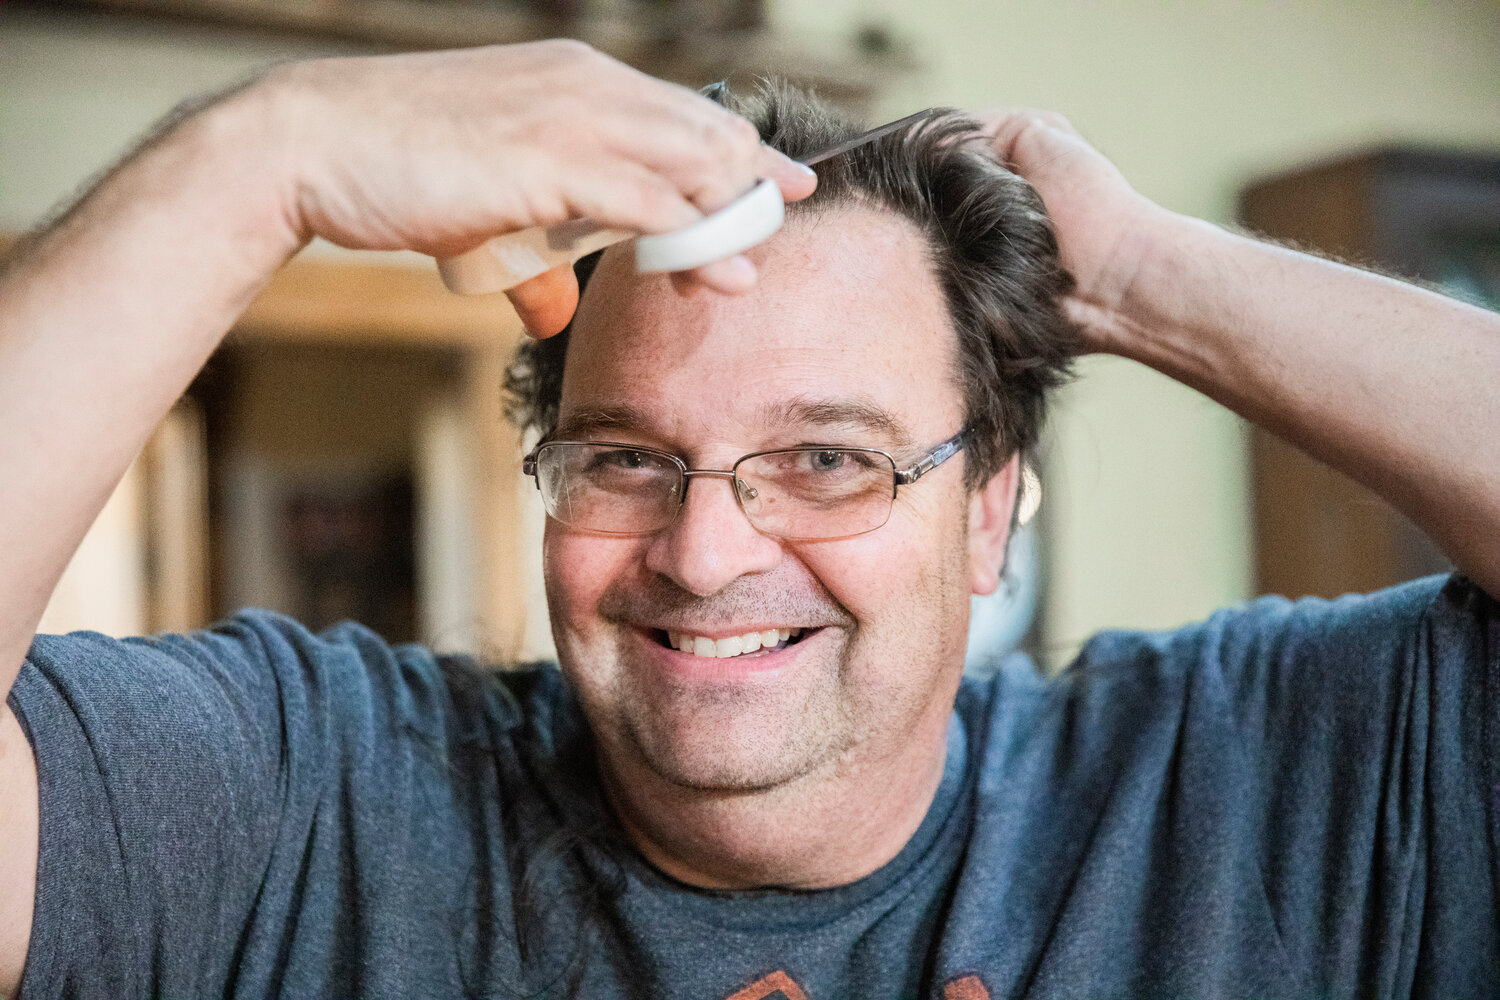 Ken Wiseman smiles while holding a pair of scissors to his hair making cuts to raise awareness for Tonja Vlach, a receptionist at I-5 Toyota, who is undergoing chemotherapy for breast cancer and an auction the family is holding online to raise funds this weekend.